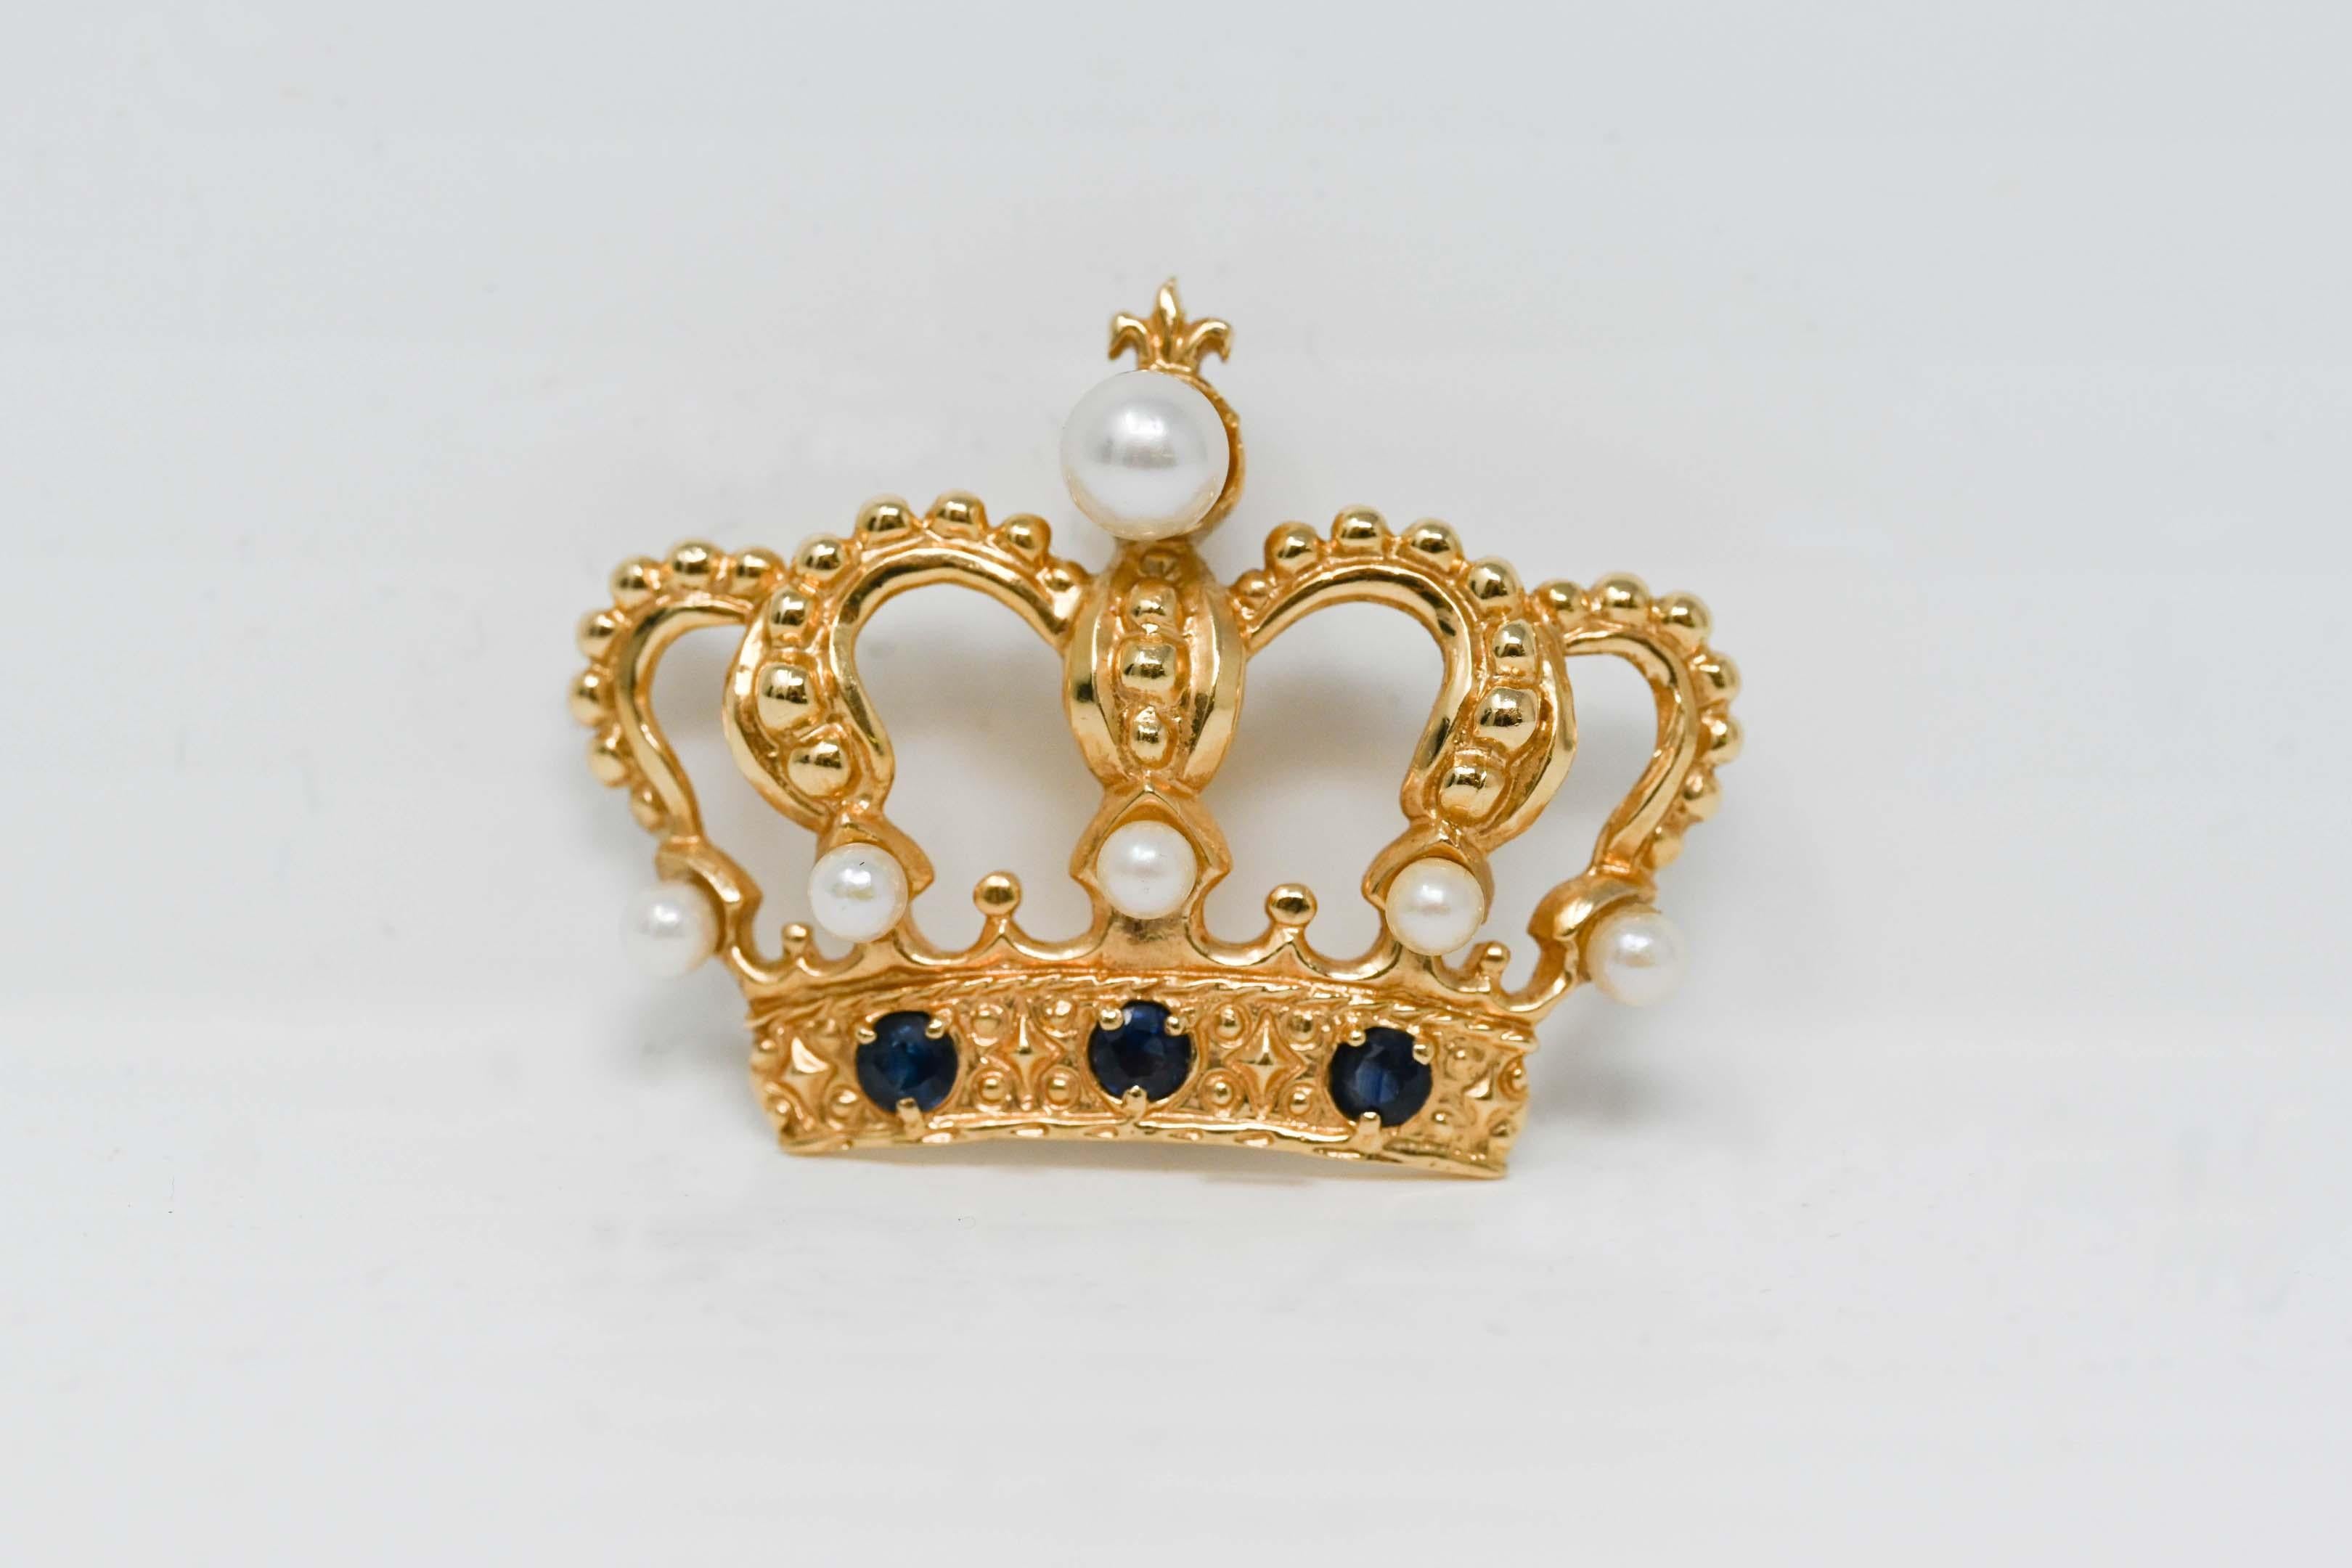 1982 14k gold brooch crown by House of Igor Carl Faberge for Franklin Mint. Fully marked on the back. Decorated with pearls and sapphire gemstone, measures 23 x 30 mm. Weighs 5.4 grams.
